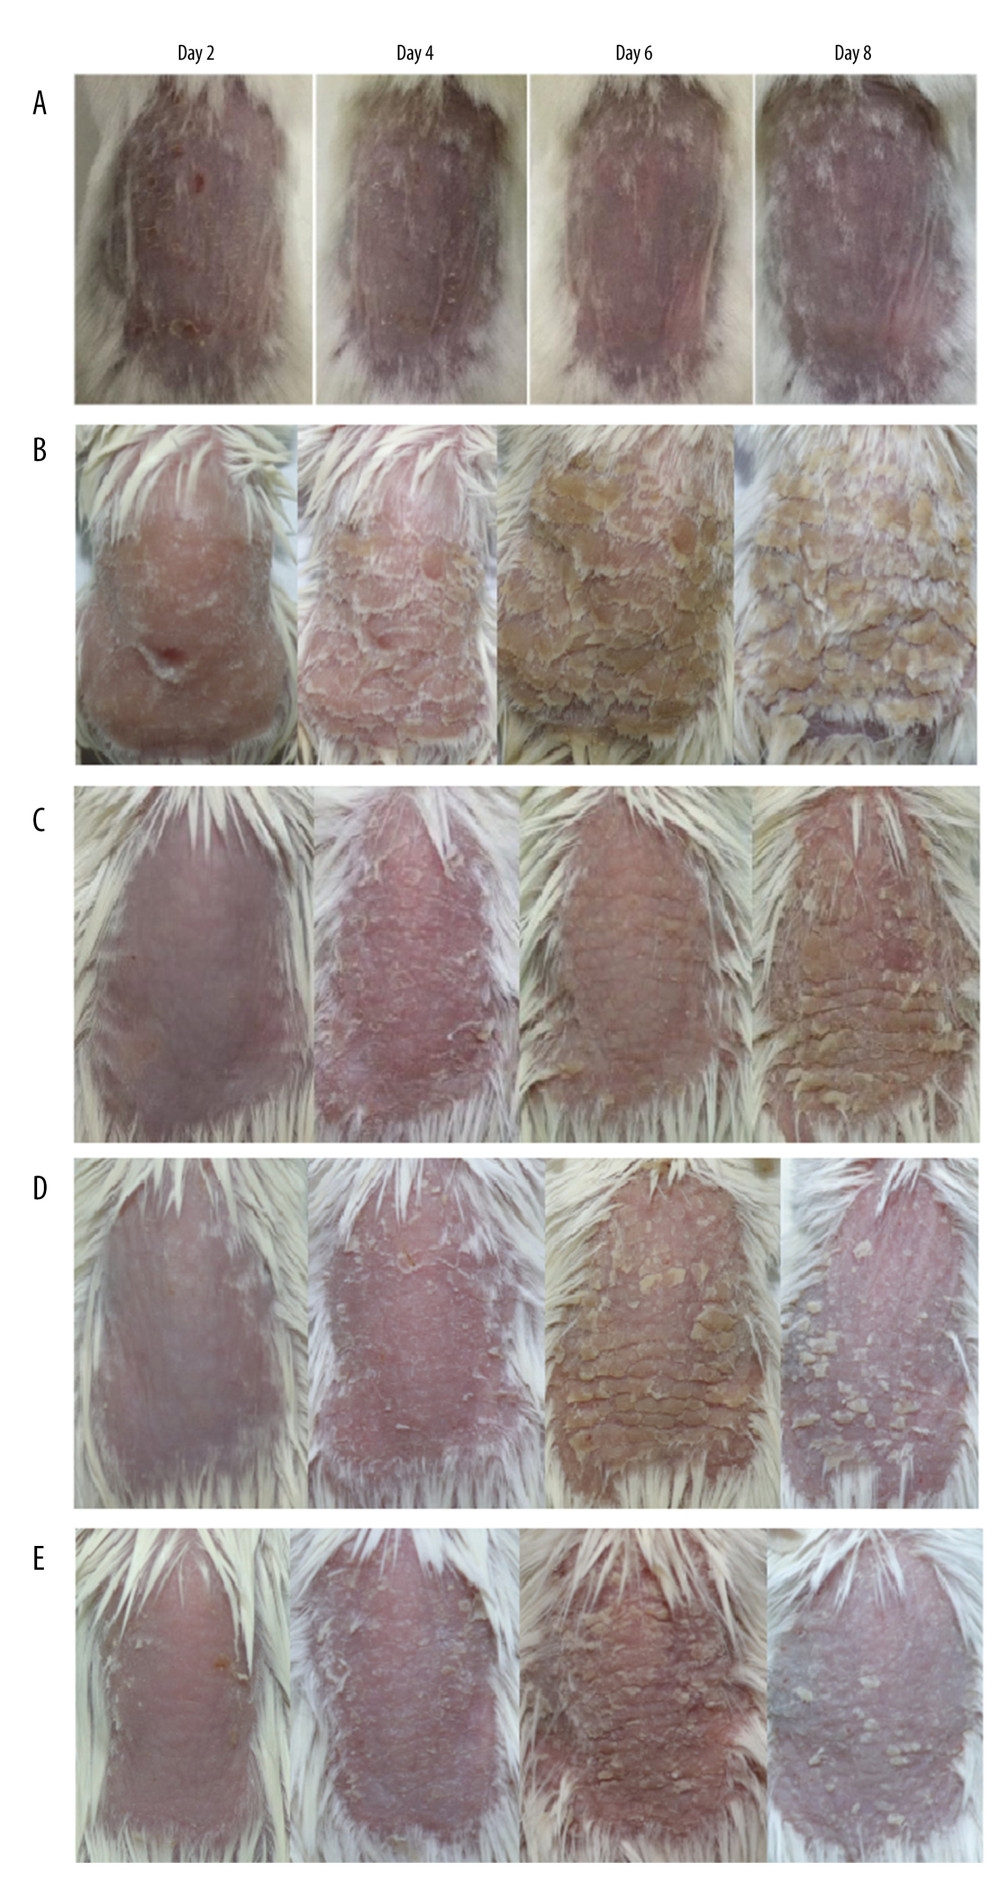 The phenotype of dorsal skin in different treatment groups observed on days 2, 4, 6, and 8. (A) Normal, (B) imiquimod (IMQ), (C) phosphate-buffered saline intramuscular injection (IM-PBS), (D) pGP3 intramuscular injection (IM-pGP3), and (E) pGP3M intramuscular injection (IM-pGP3M) groups. The IMQ, IM-PBS, IM-pGP3, and IM-pGP3M groups exhibited psoriasis-like dermatitis signs including erythema, skin scaling, and thickening after IMQ application. The typical signs of psoriasis-like dermatitis decreased after the sixth day in the IM-pGP3, and IM-pGP3M groups. Compared with the IMQ and IM-PBS groups, the IM-pGP3 and IM-pGP3M groups exhibited milder skin lesions and shorter healing time.